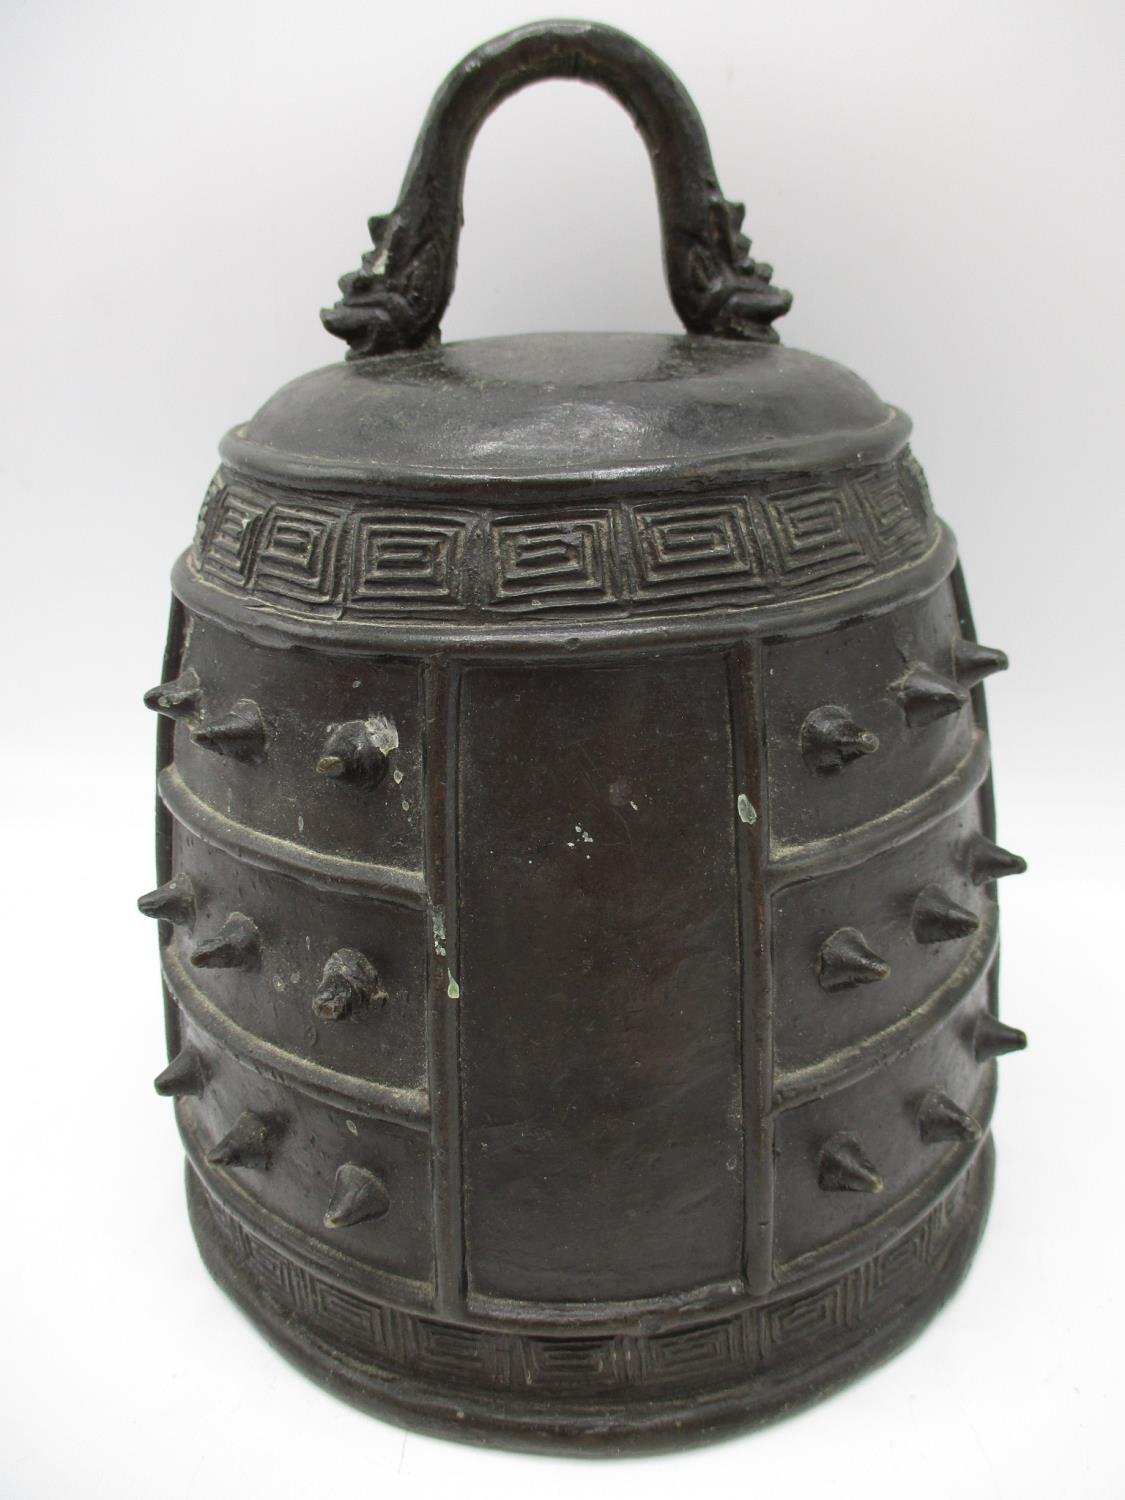 A Qing Dynasty Chinese bronze Bianzhong or chime bell with a twin mask handle, panels of - Image 4 of 7